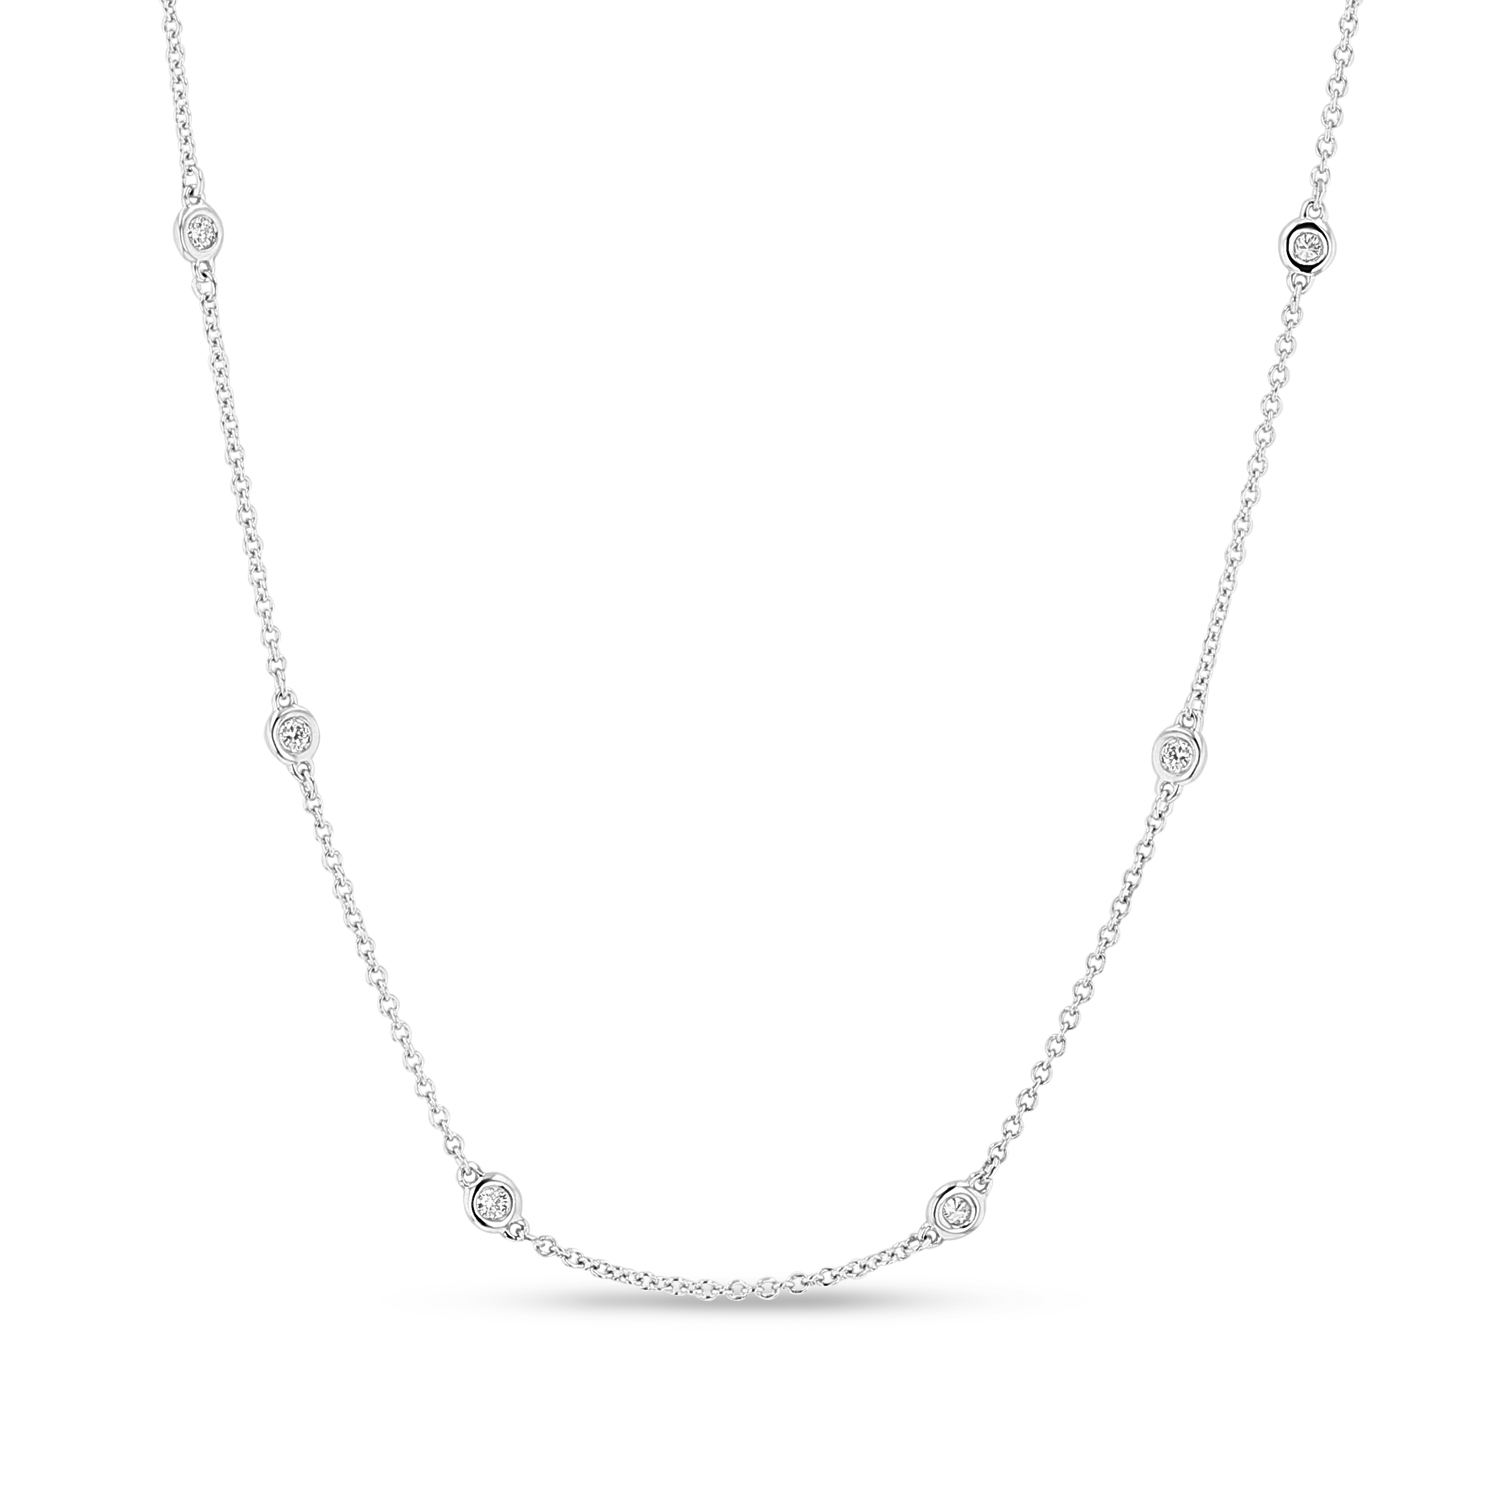 View 0.29ctw 18 inch Diamond By the Yard Necklace in 14k White Gold